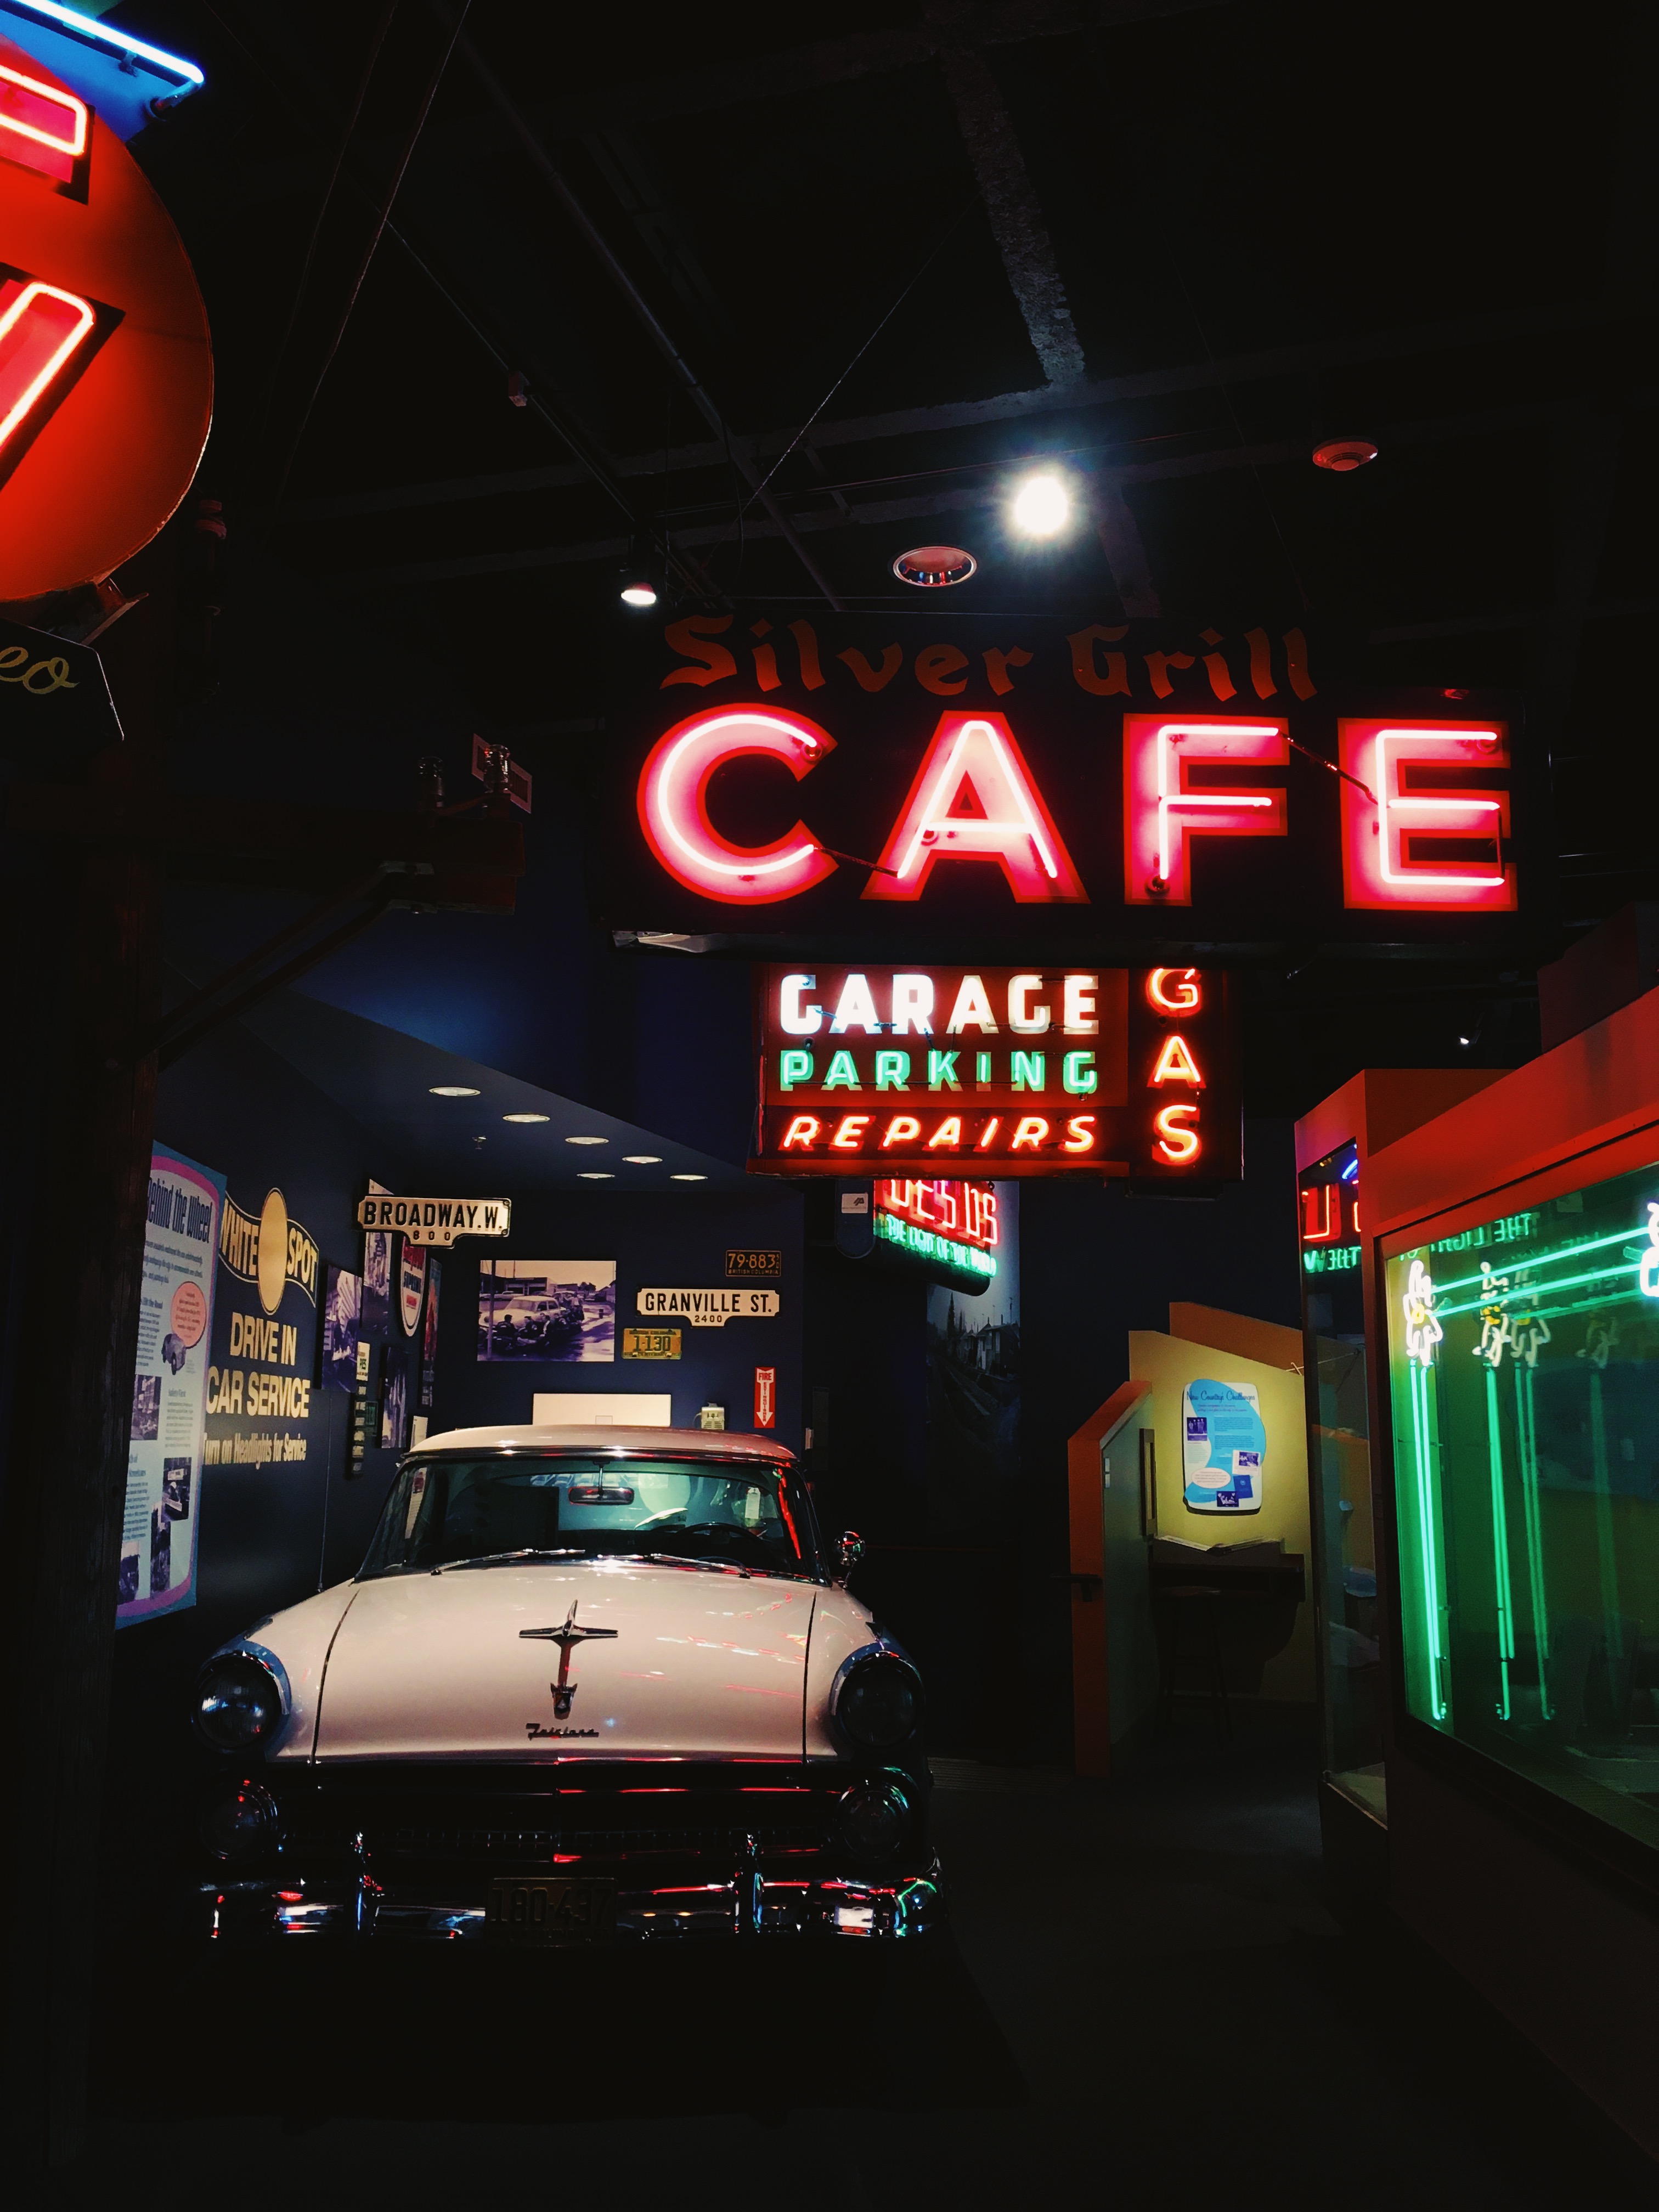 A 50s exhibit, with neon signs hanging above and a vintage car.